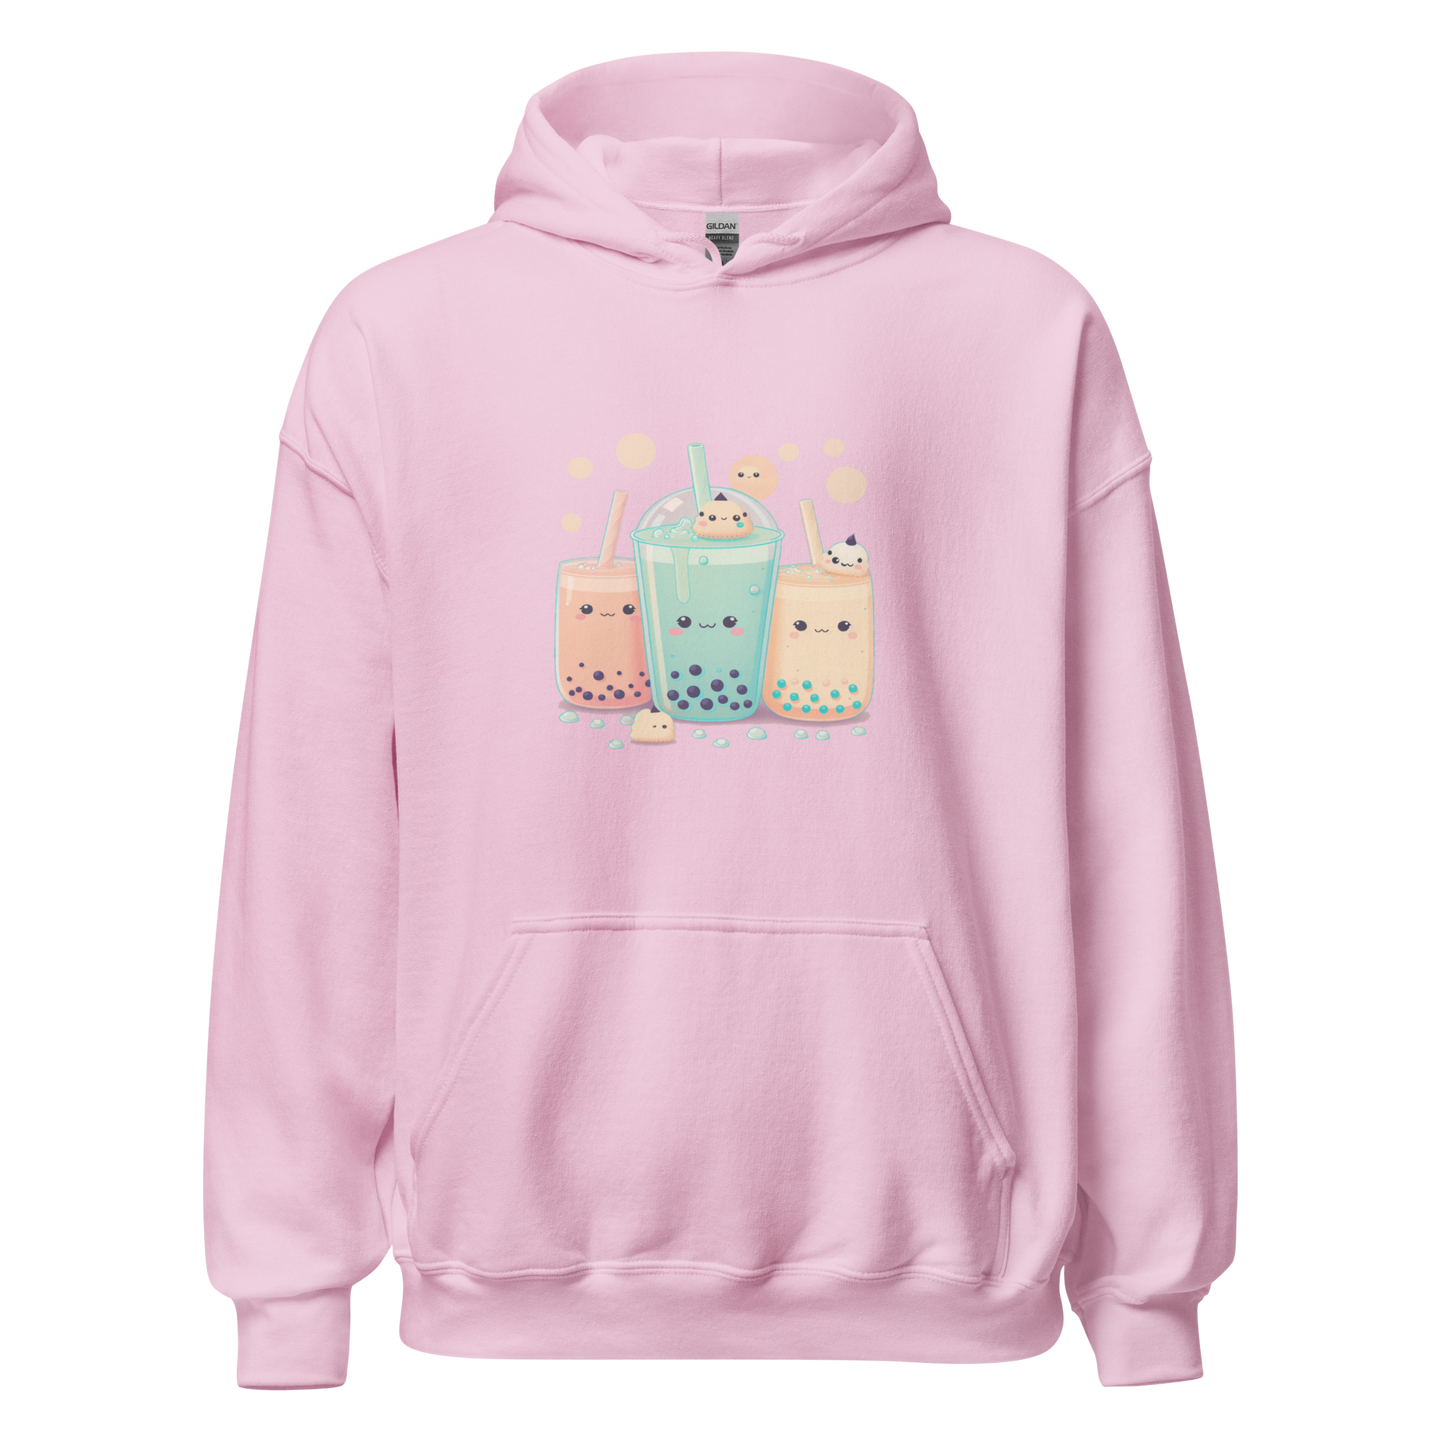 Bubble me tea! Casual Adult Hoodies Sweatshirt for Men Women, Comfortable Fabric, Pullover with Pockets Unisex